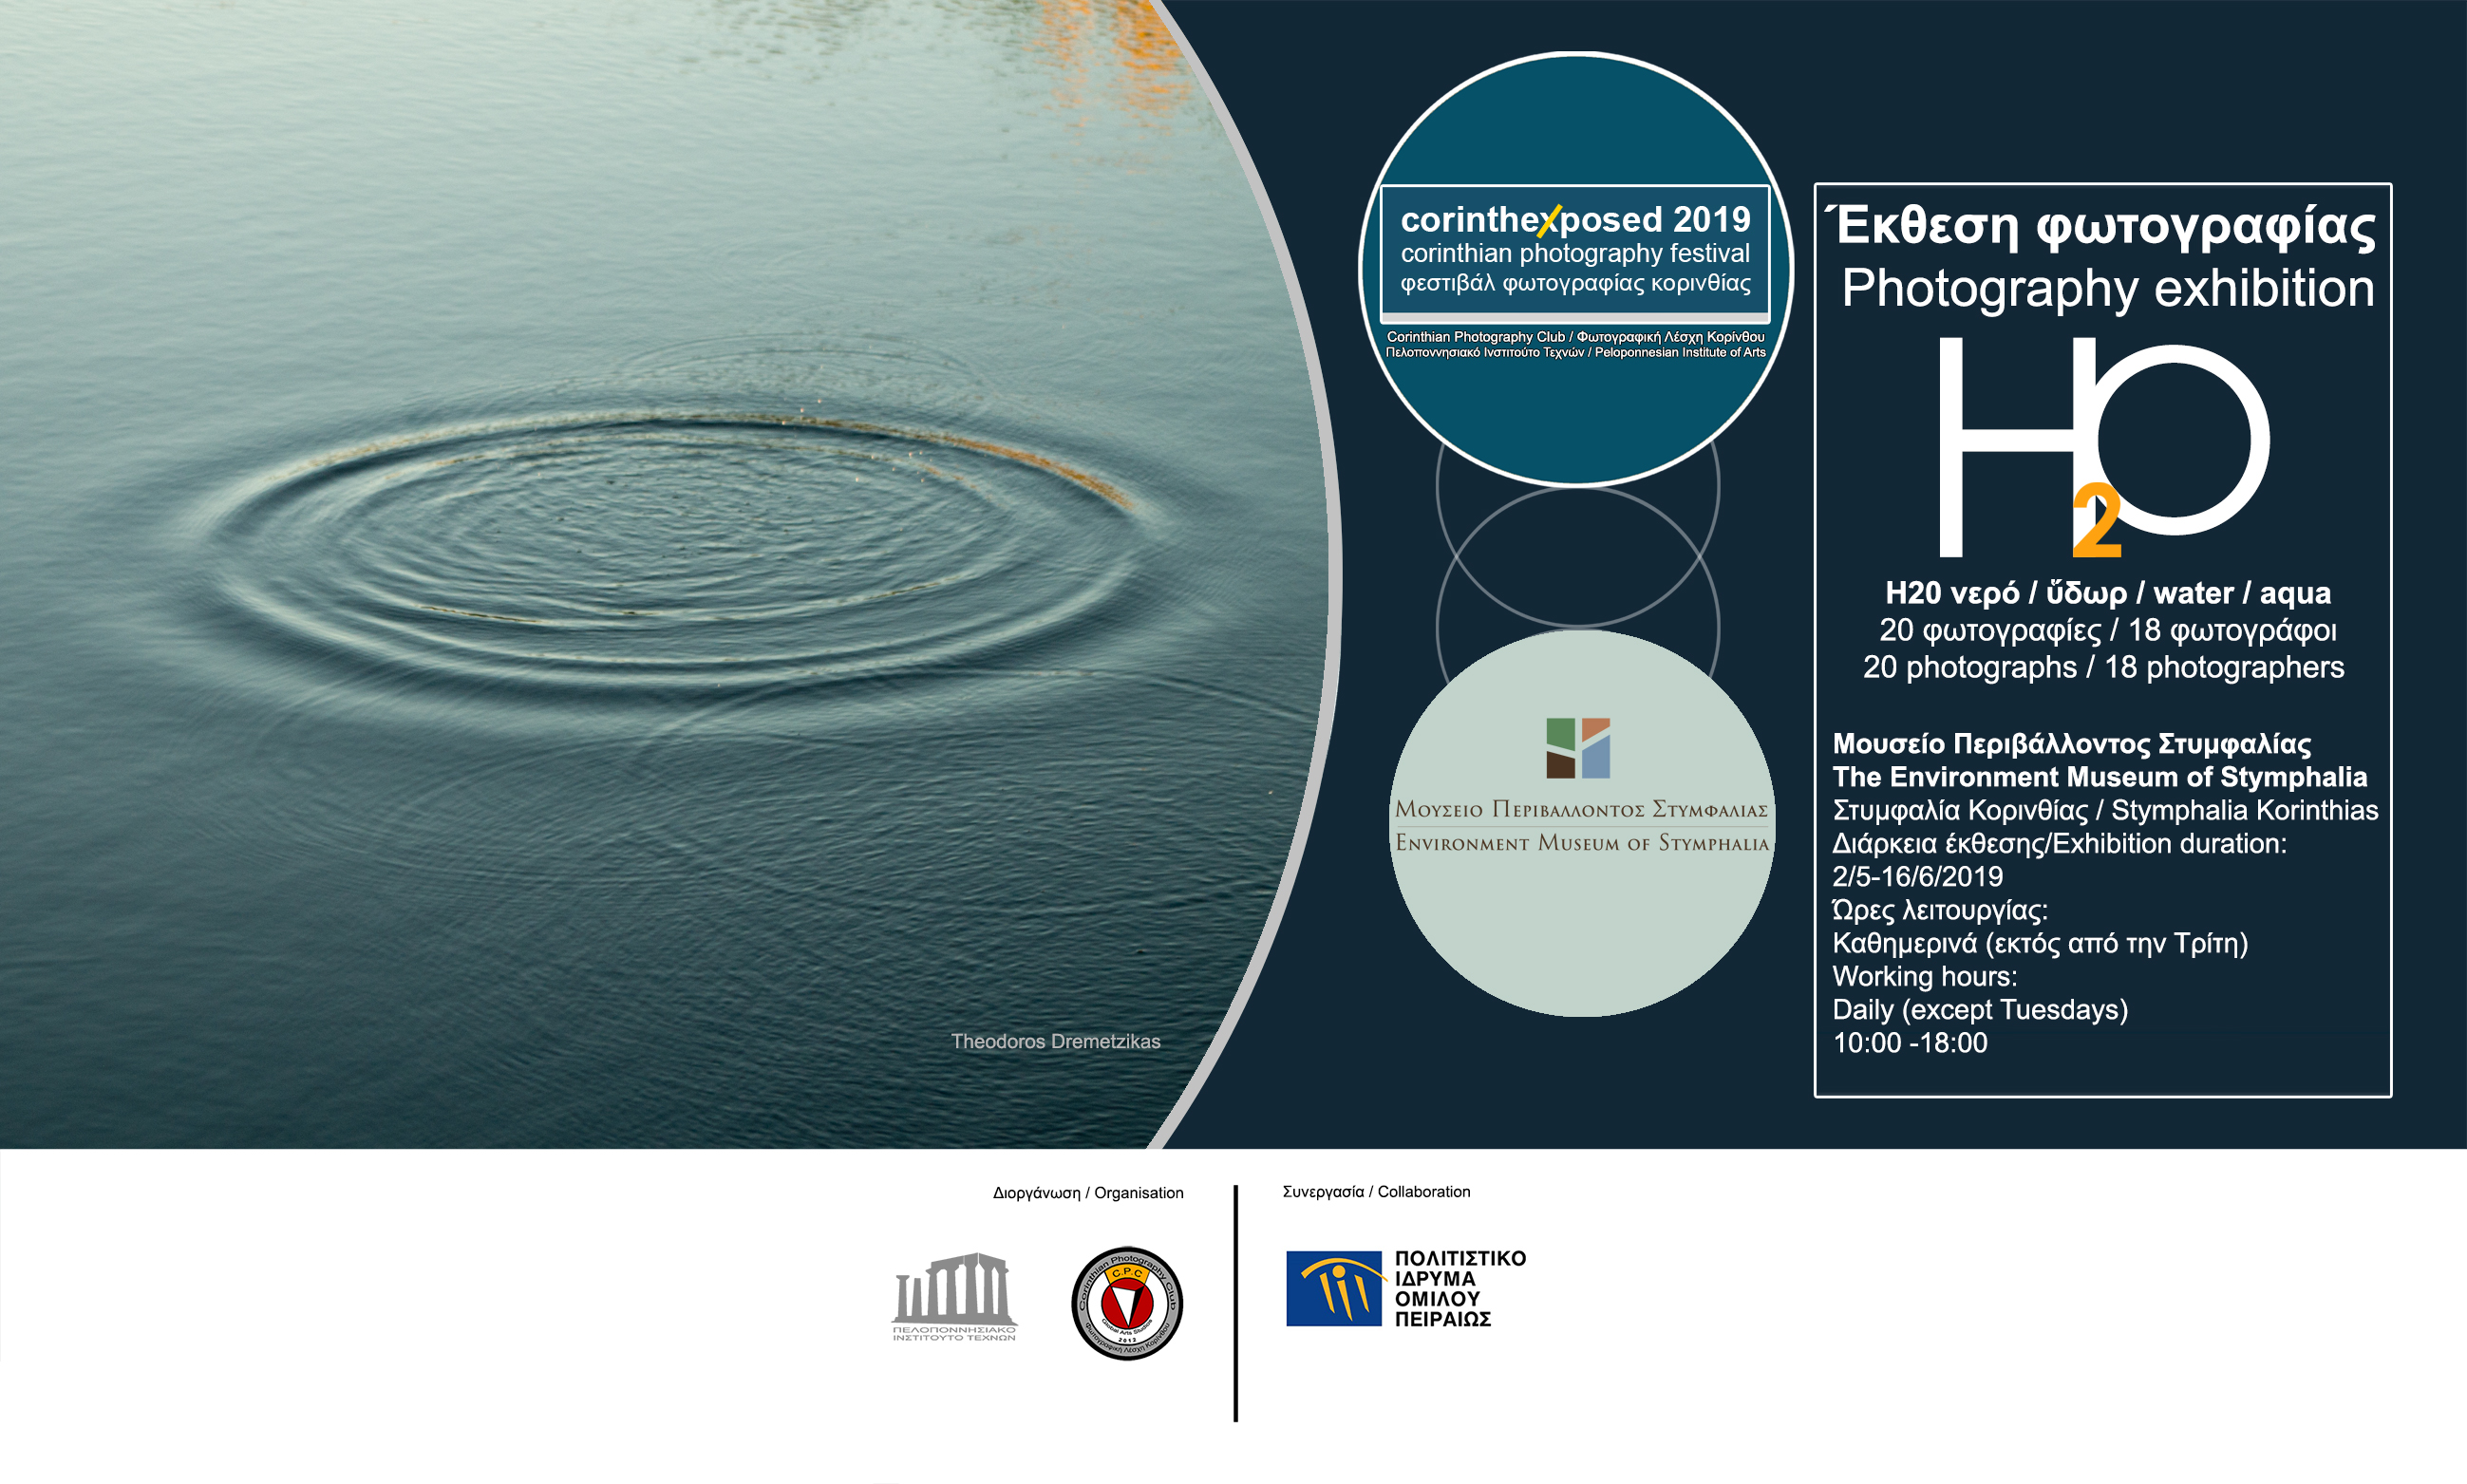 International Photography Exhibition entitled "H20 νερό / ὕδωρ/ water / aqua" at the Environment Museum of Stymphalia